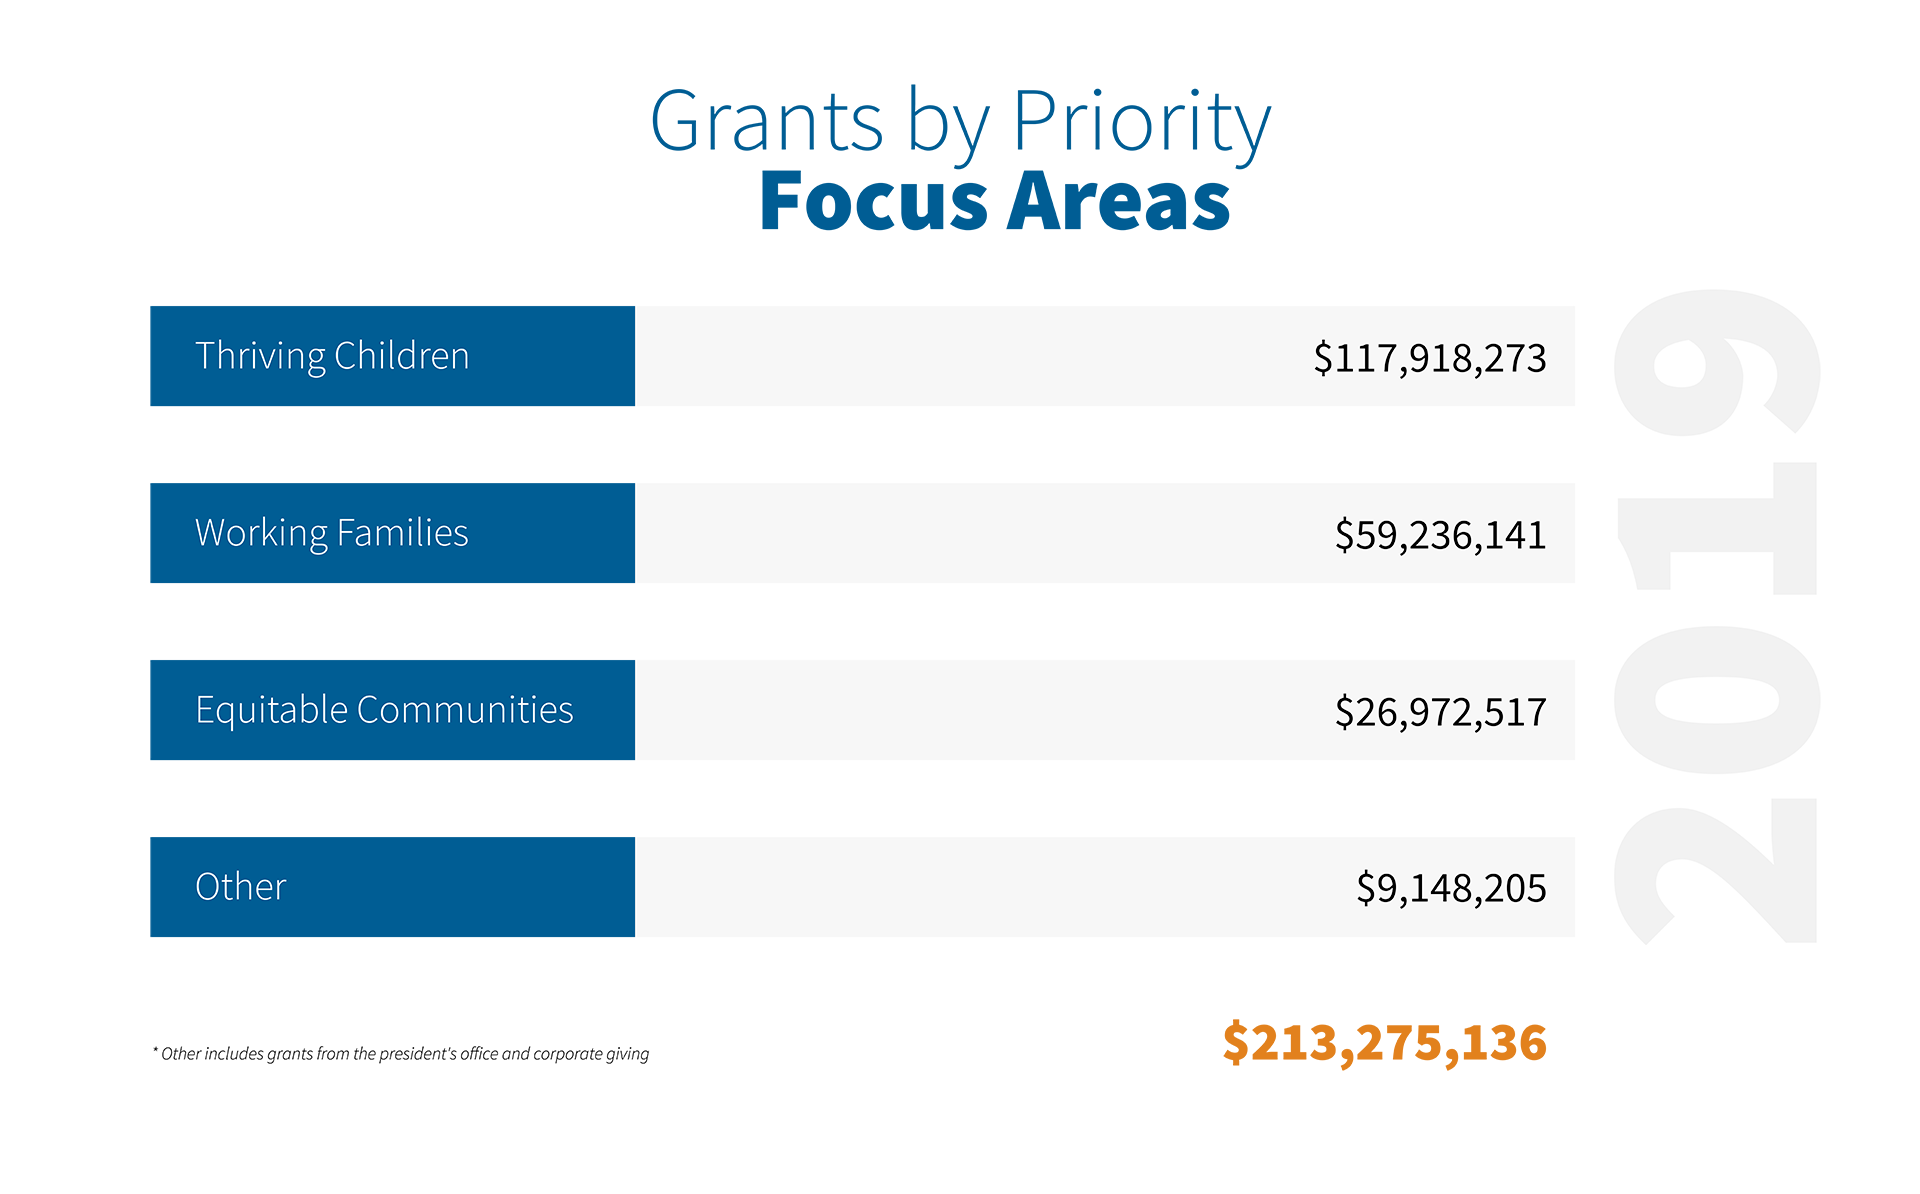 Grants by Priority Focus Area